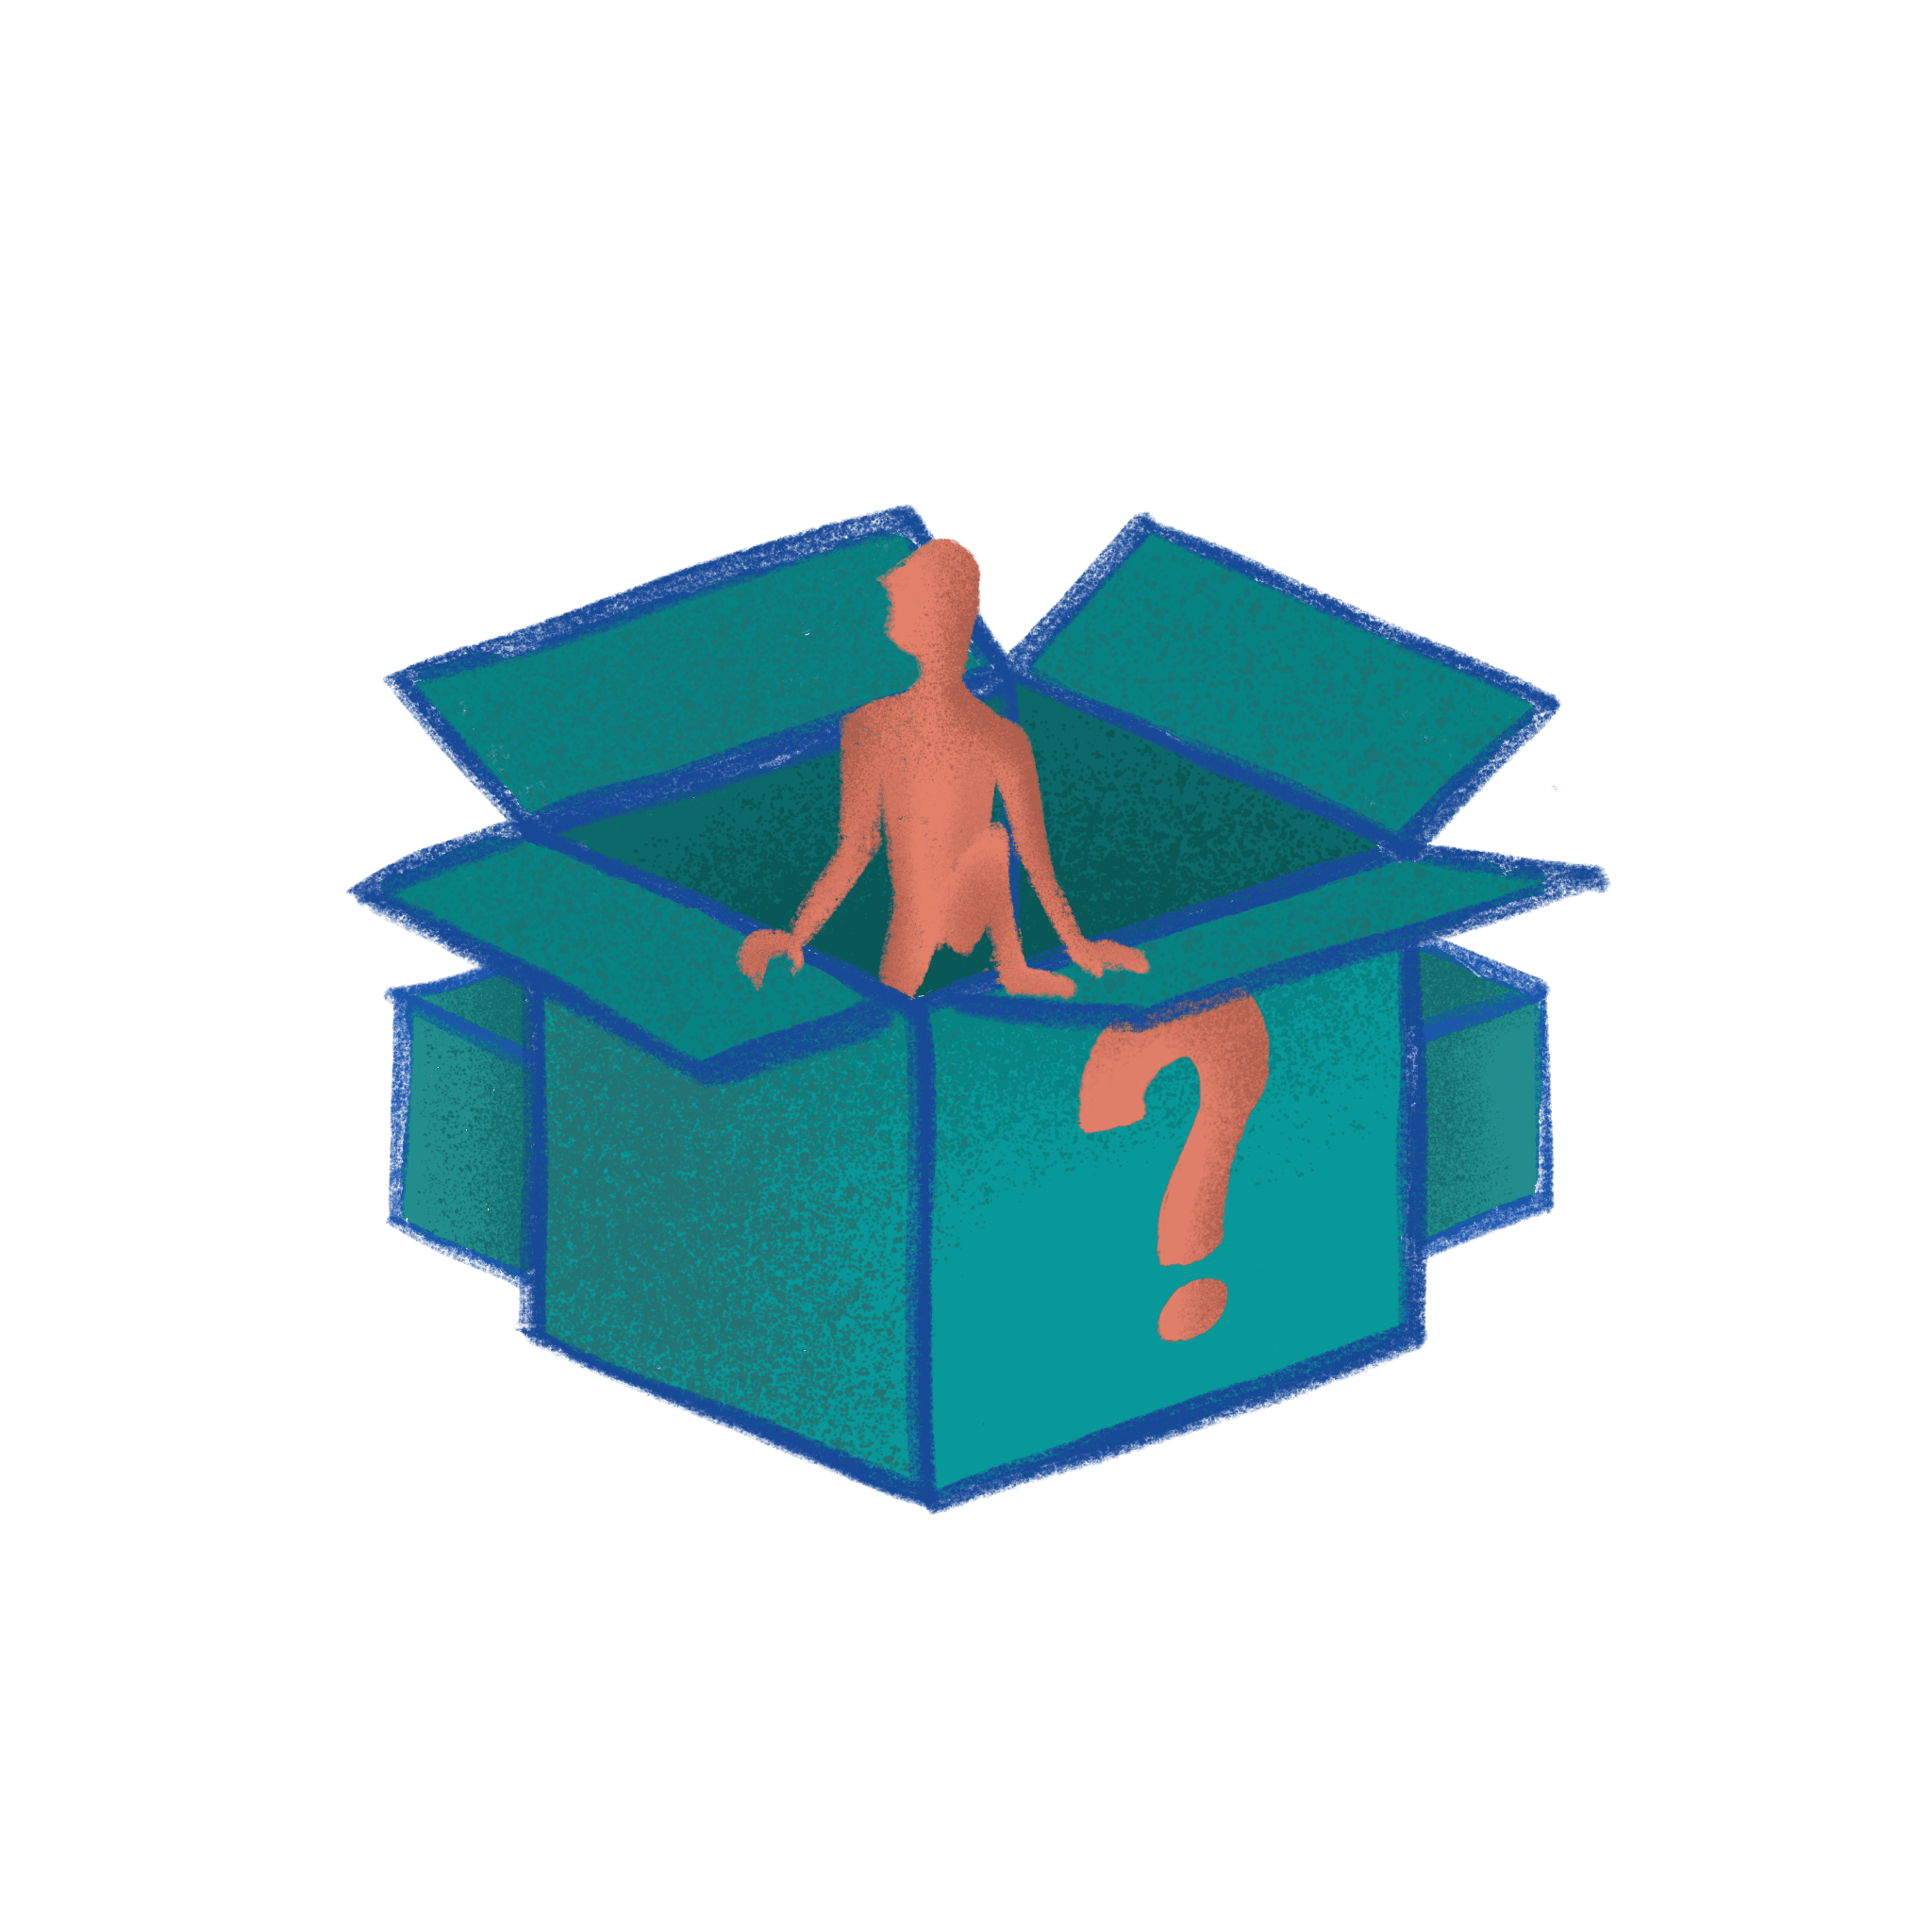 A man getting out of a box with a question mark in it